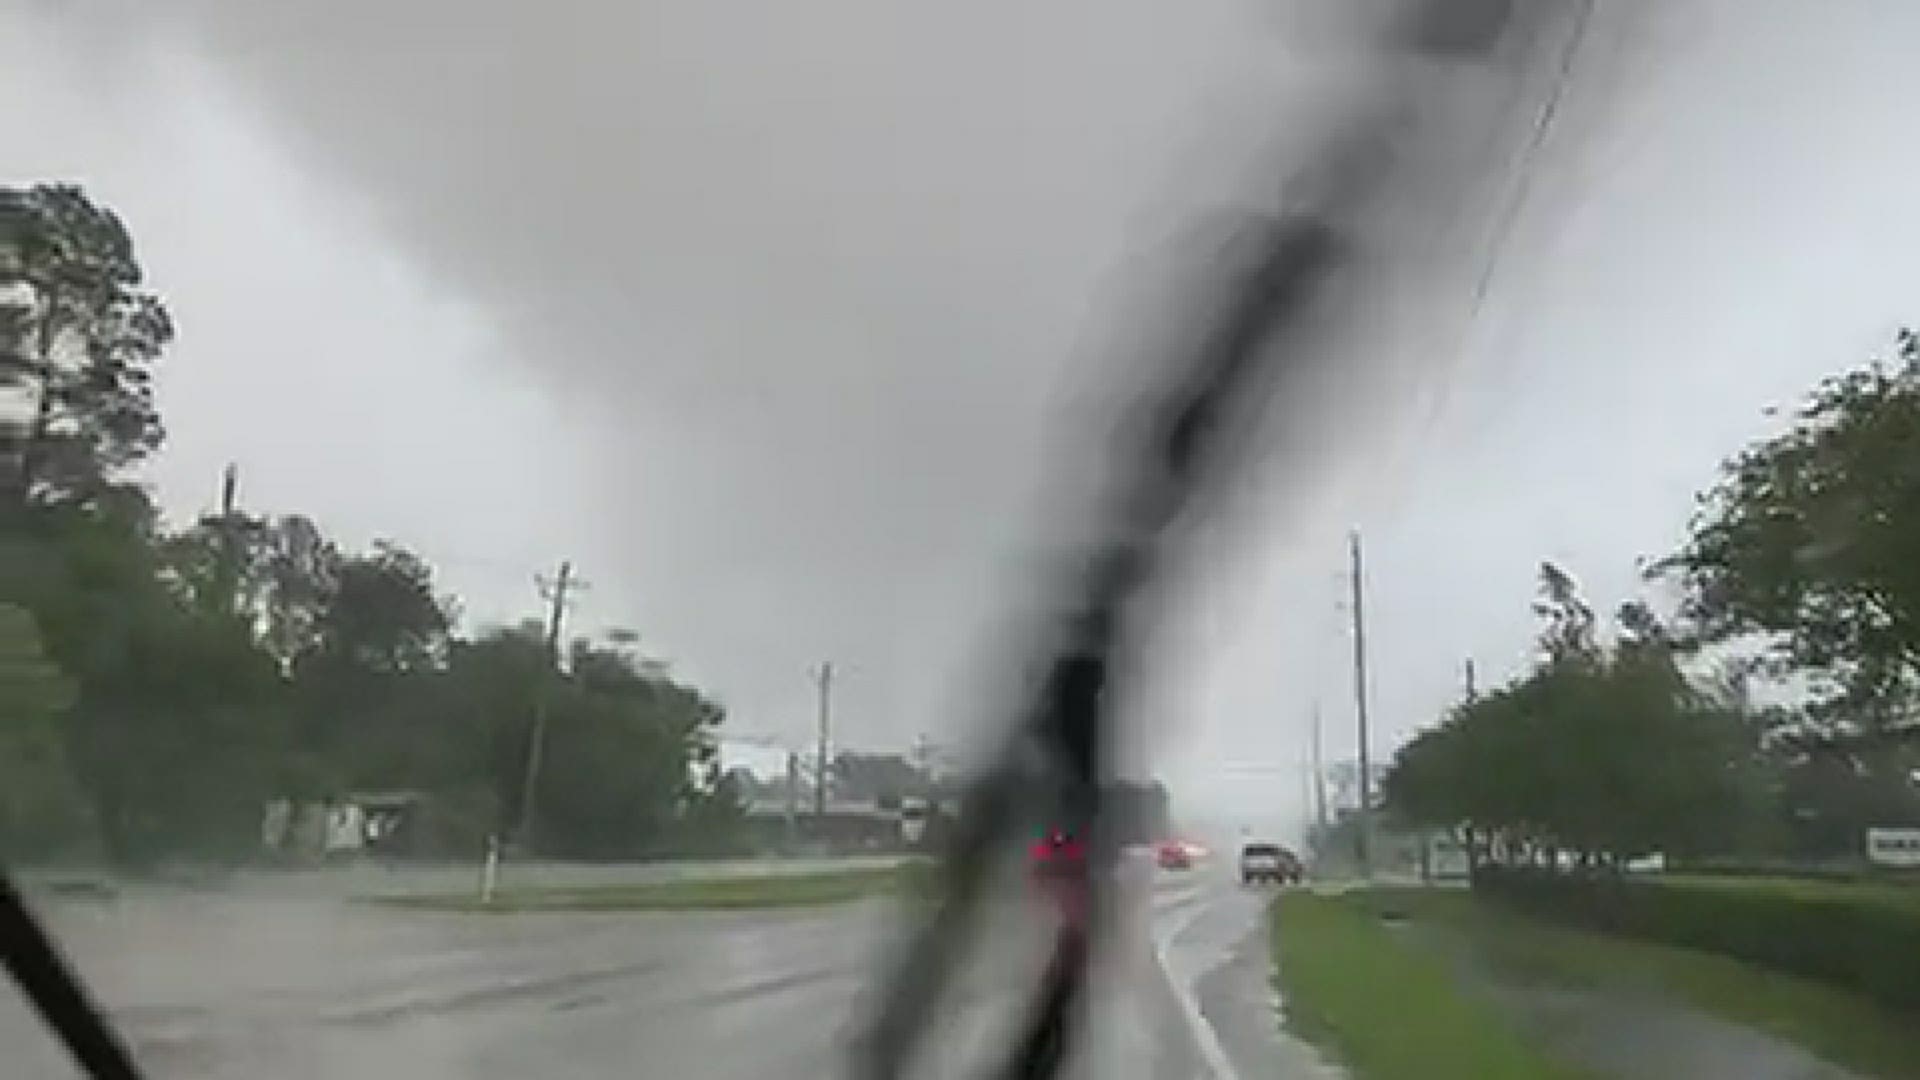 A First Coast Viewer captured an incredible video of a possible tornado near Phillips Highway in Jacksonville.
Credit: James Dino